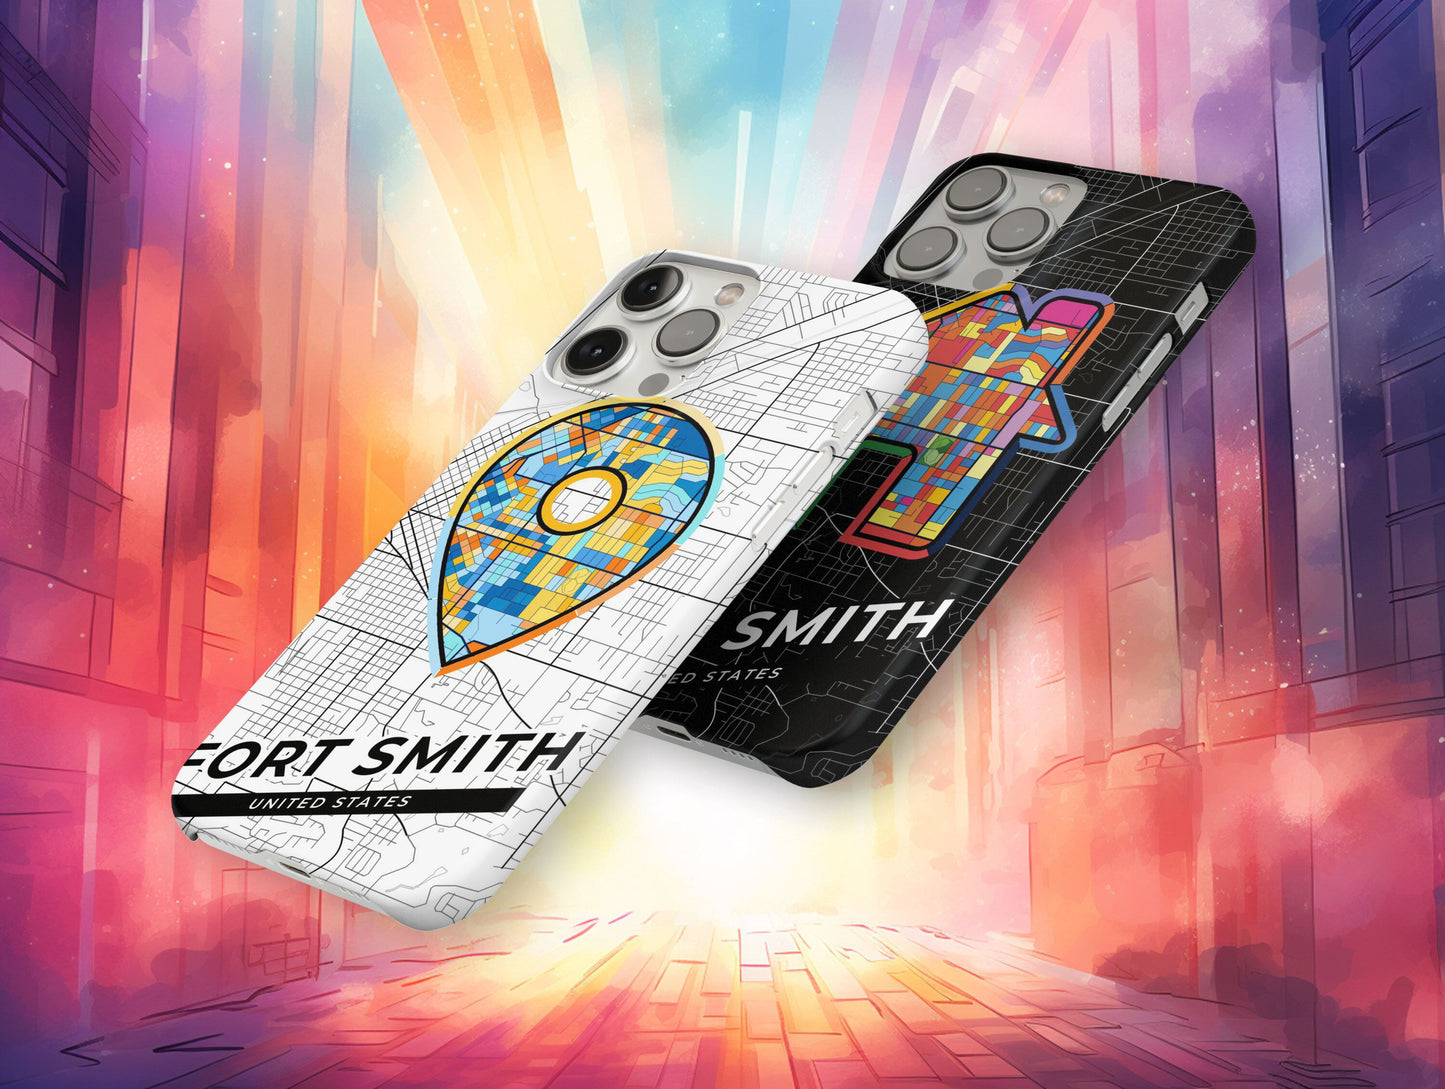 Fort Smith Arkansas slim phone case with colorful icon. Birthday, wedding or housewarming gift. Couple match cases.